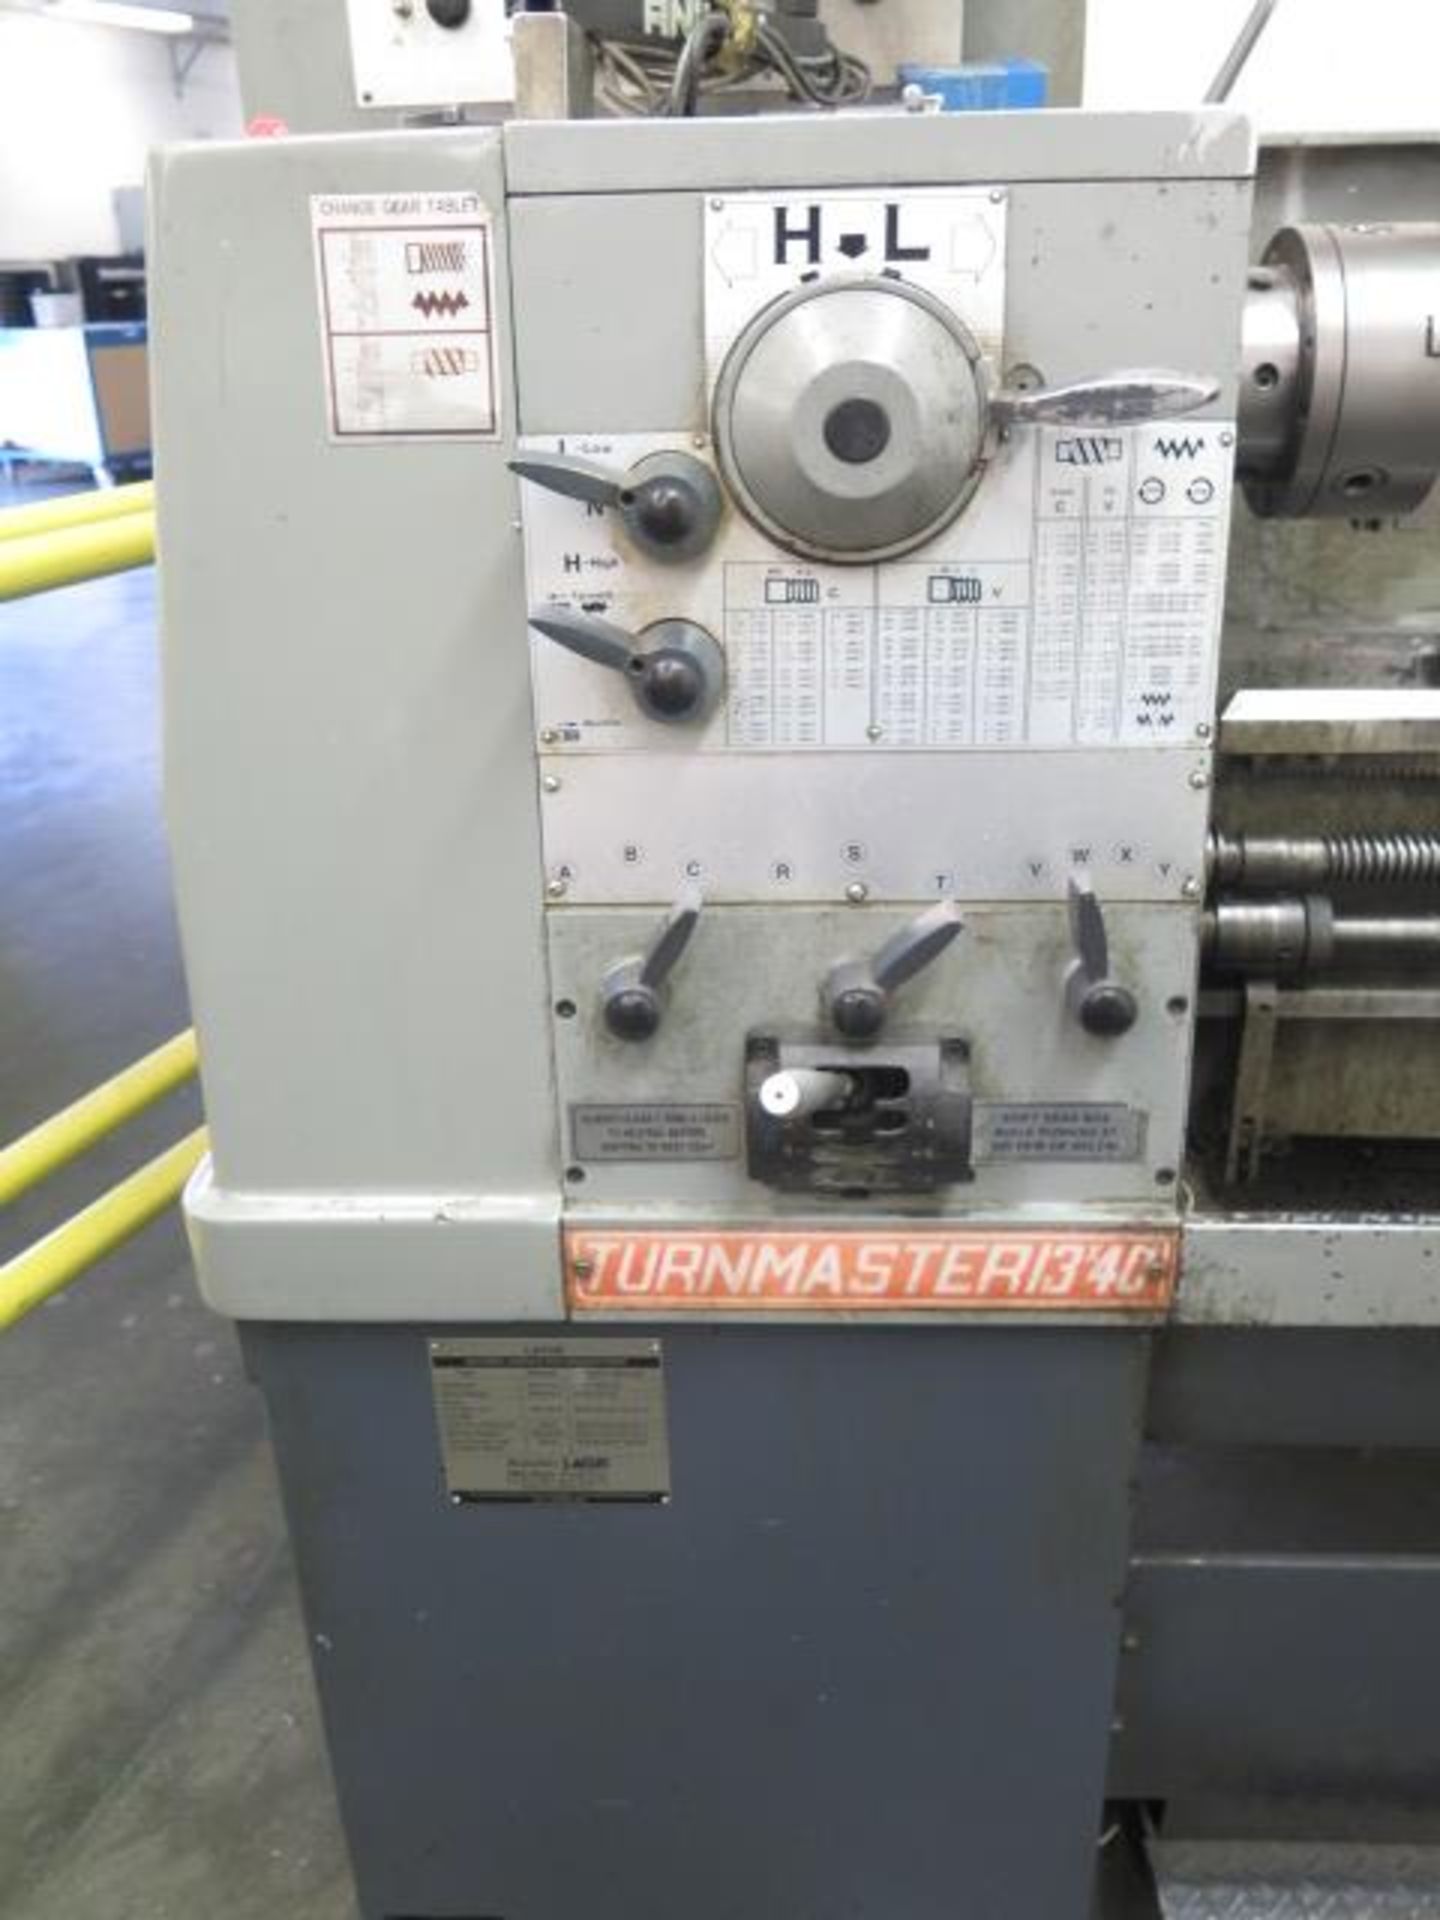 Lagun Turnmaster 13” x 40” Geared Head Gap Bed Lathe s/n 13498051-41 w/ DRO, SOLD AS IS - Image 3 of 12